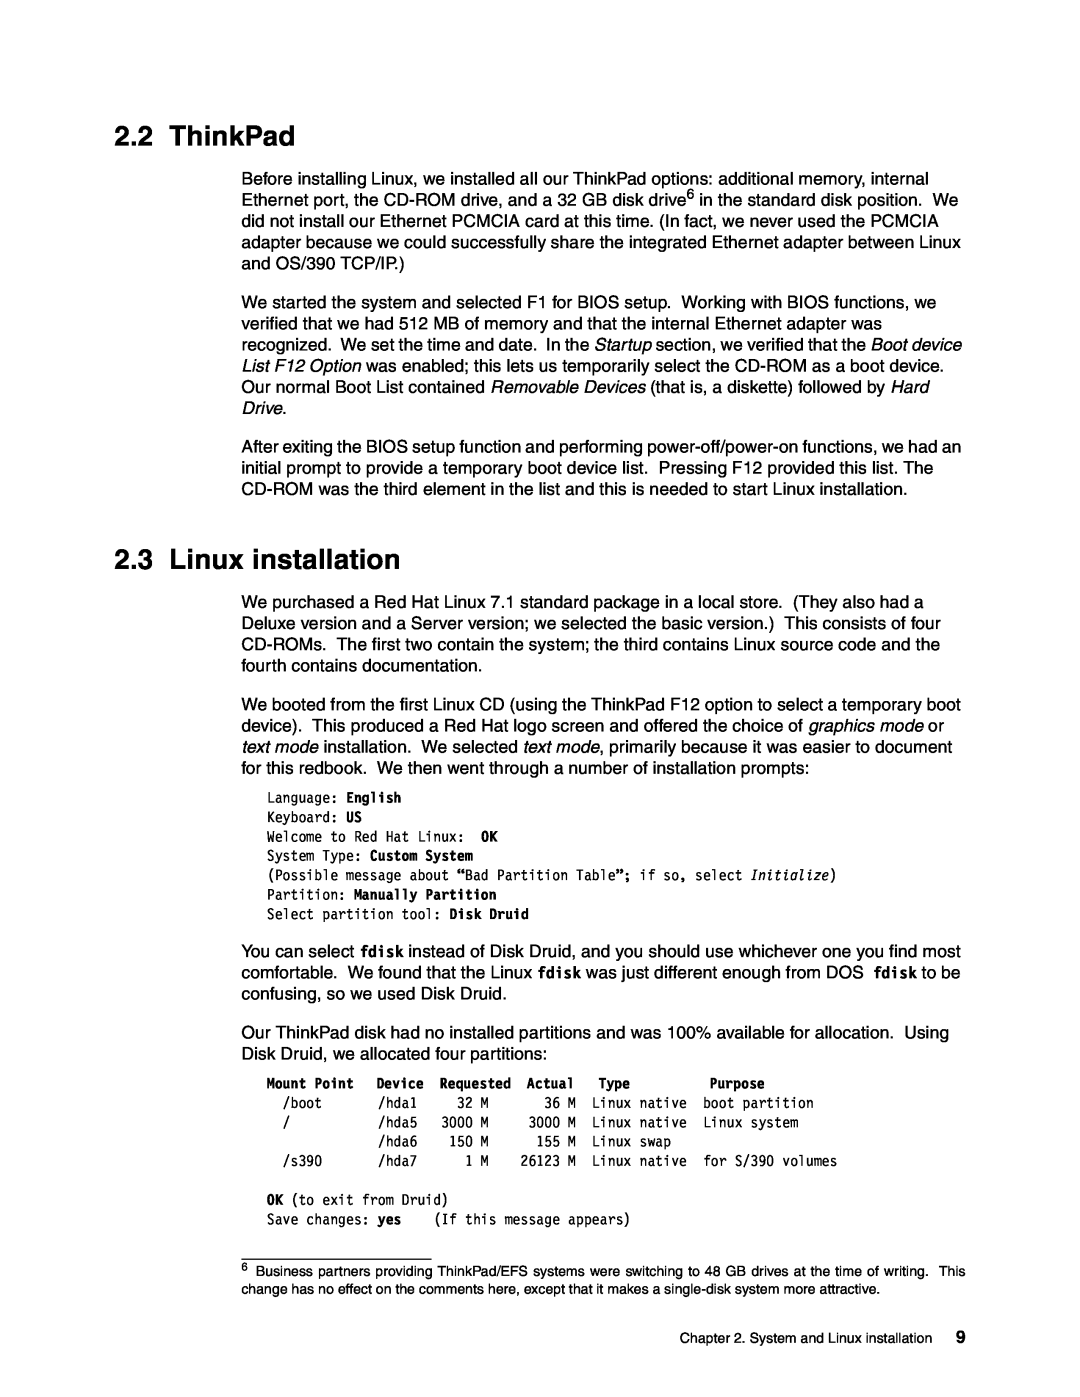 IBM s/390 manual ThinkPad, Linux installation, Partition Manually Partition, Mount Point, Device, Requested, Actual, Type 